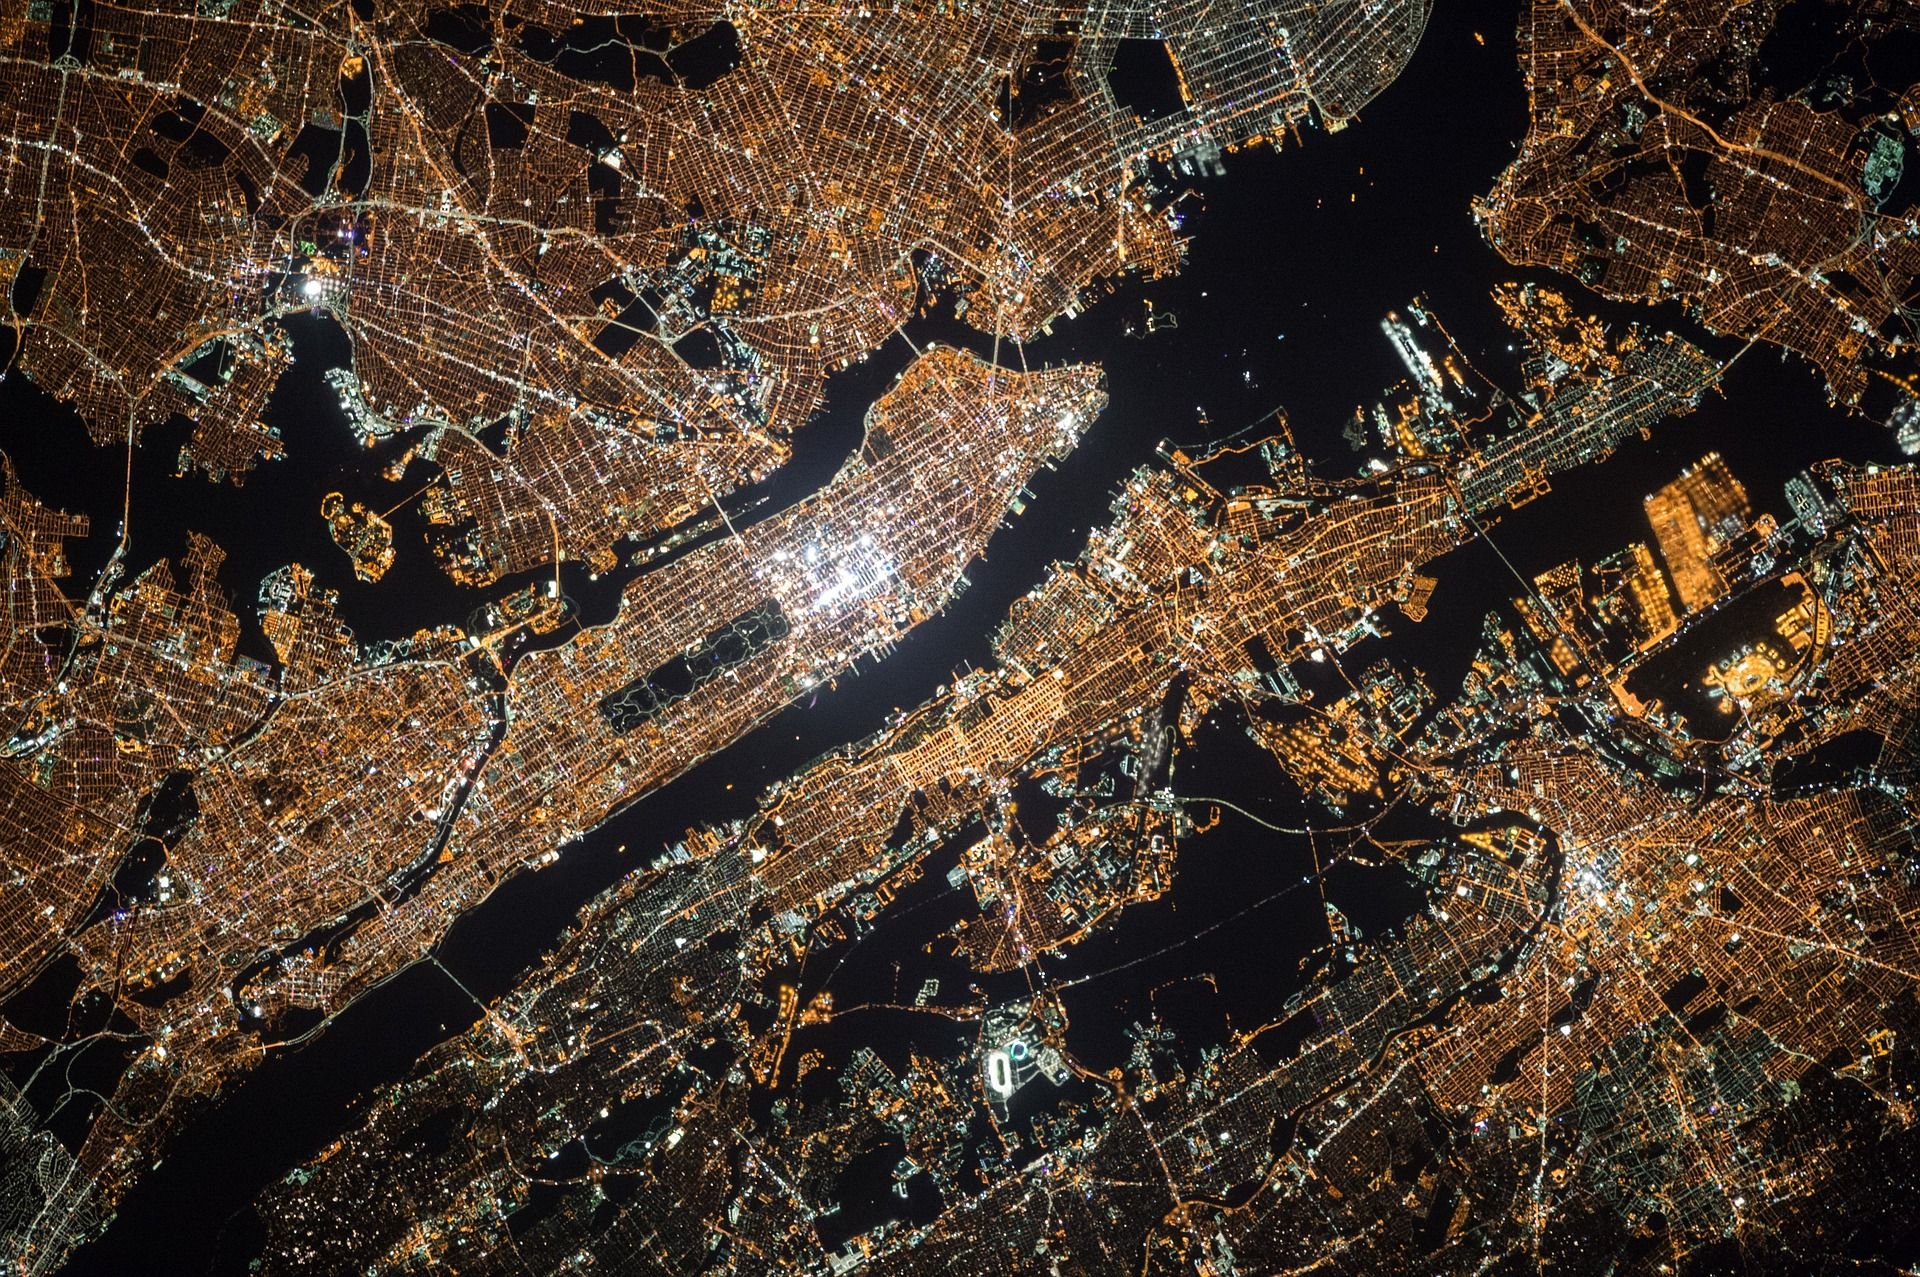 Satellite image of a city at night